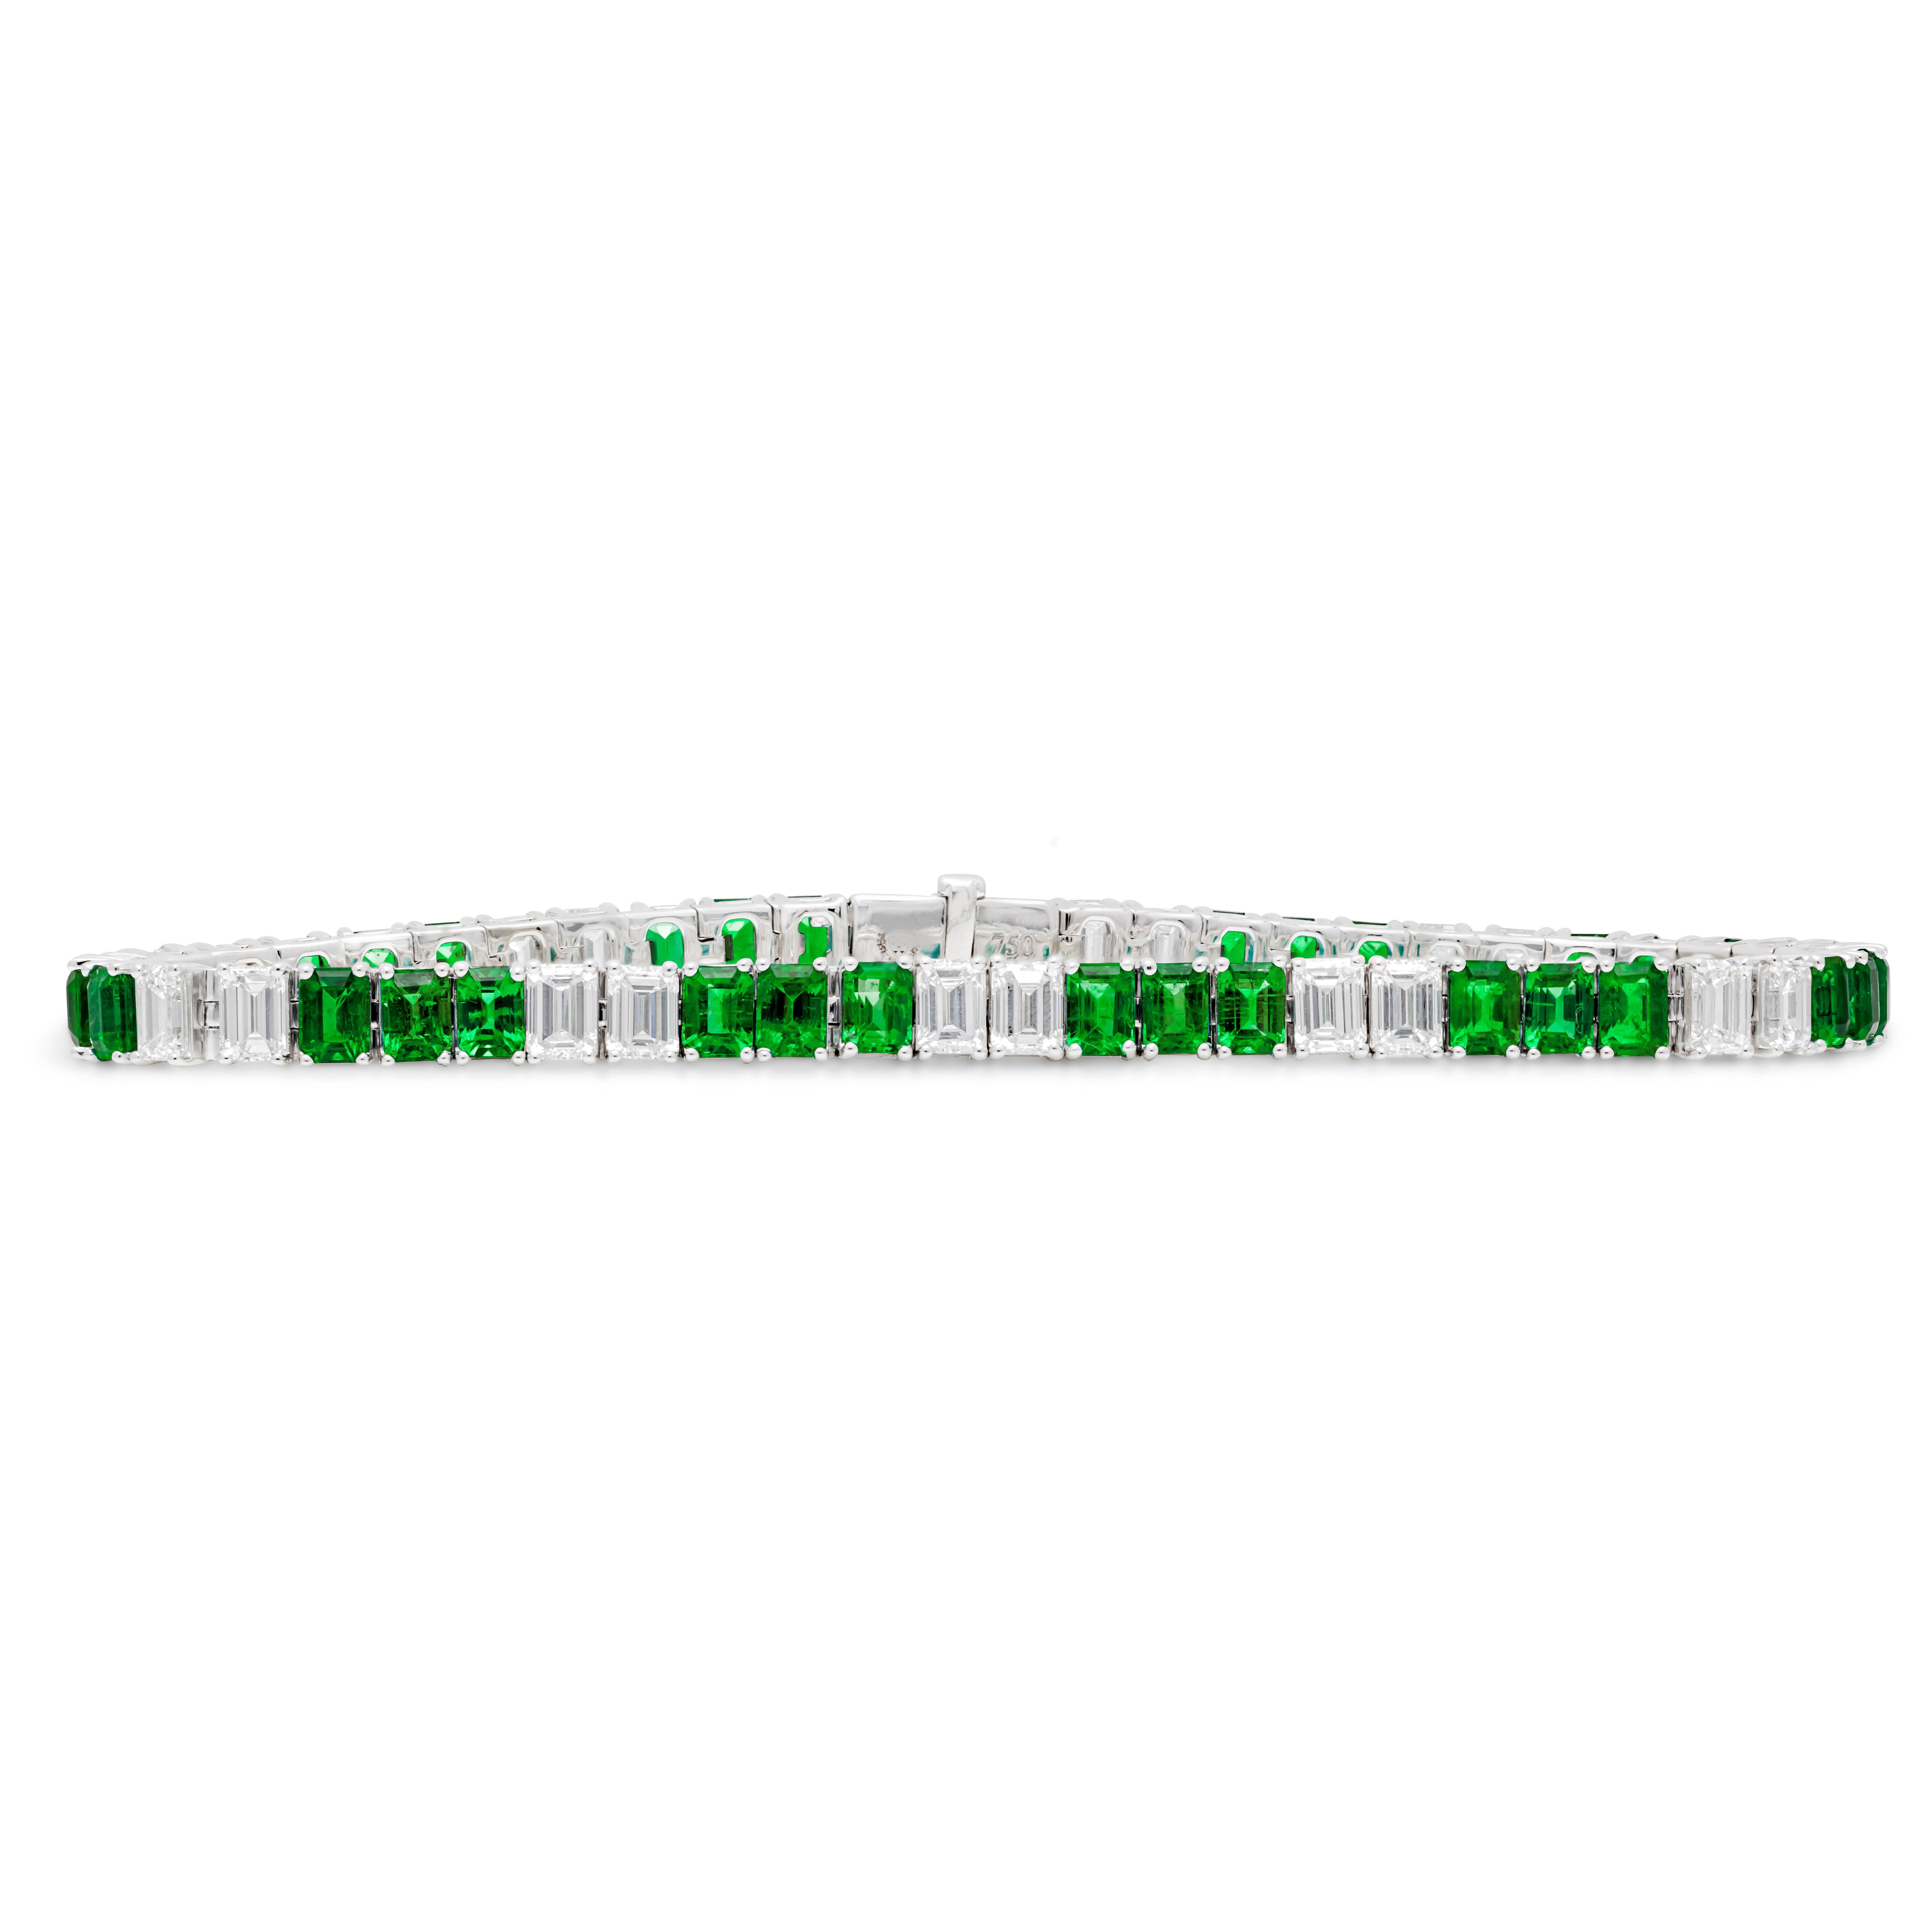 An exquisite and simple tennis bracelet, showcasing 31 color-rich emerald cut emeralds weighing 6.01 carats total, elegantly spaced with 24 emerald cut brilliant diamonds weighing 5.35 carats total with F color and VS clarity. Set on a classic four